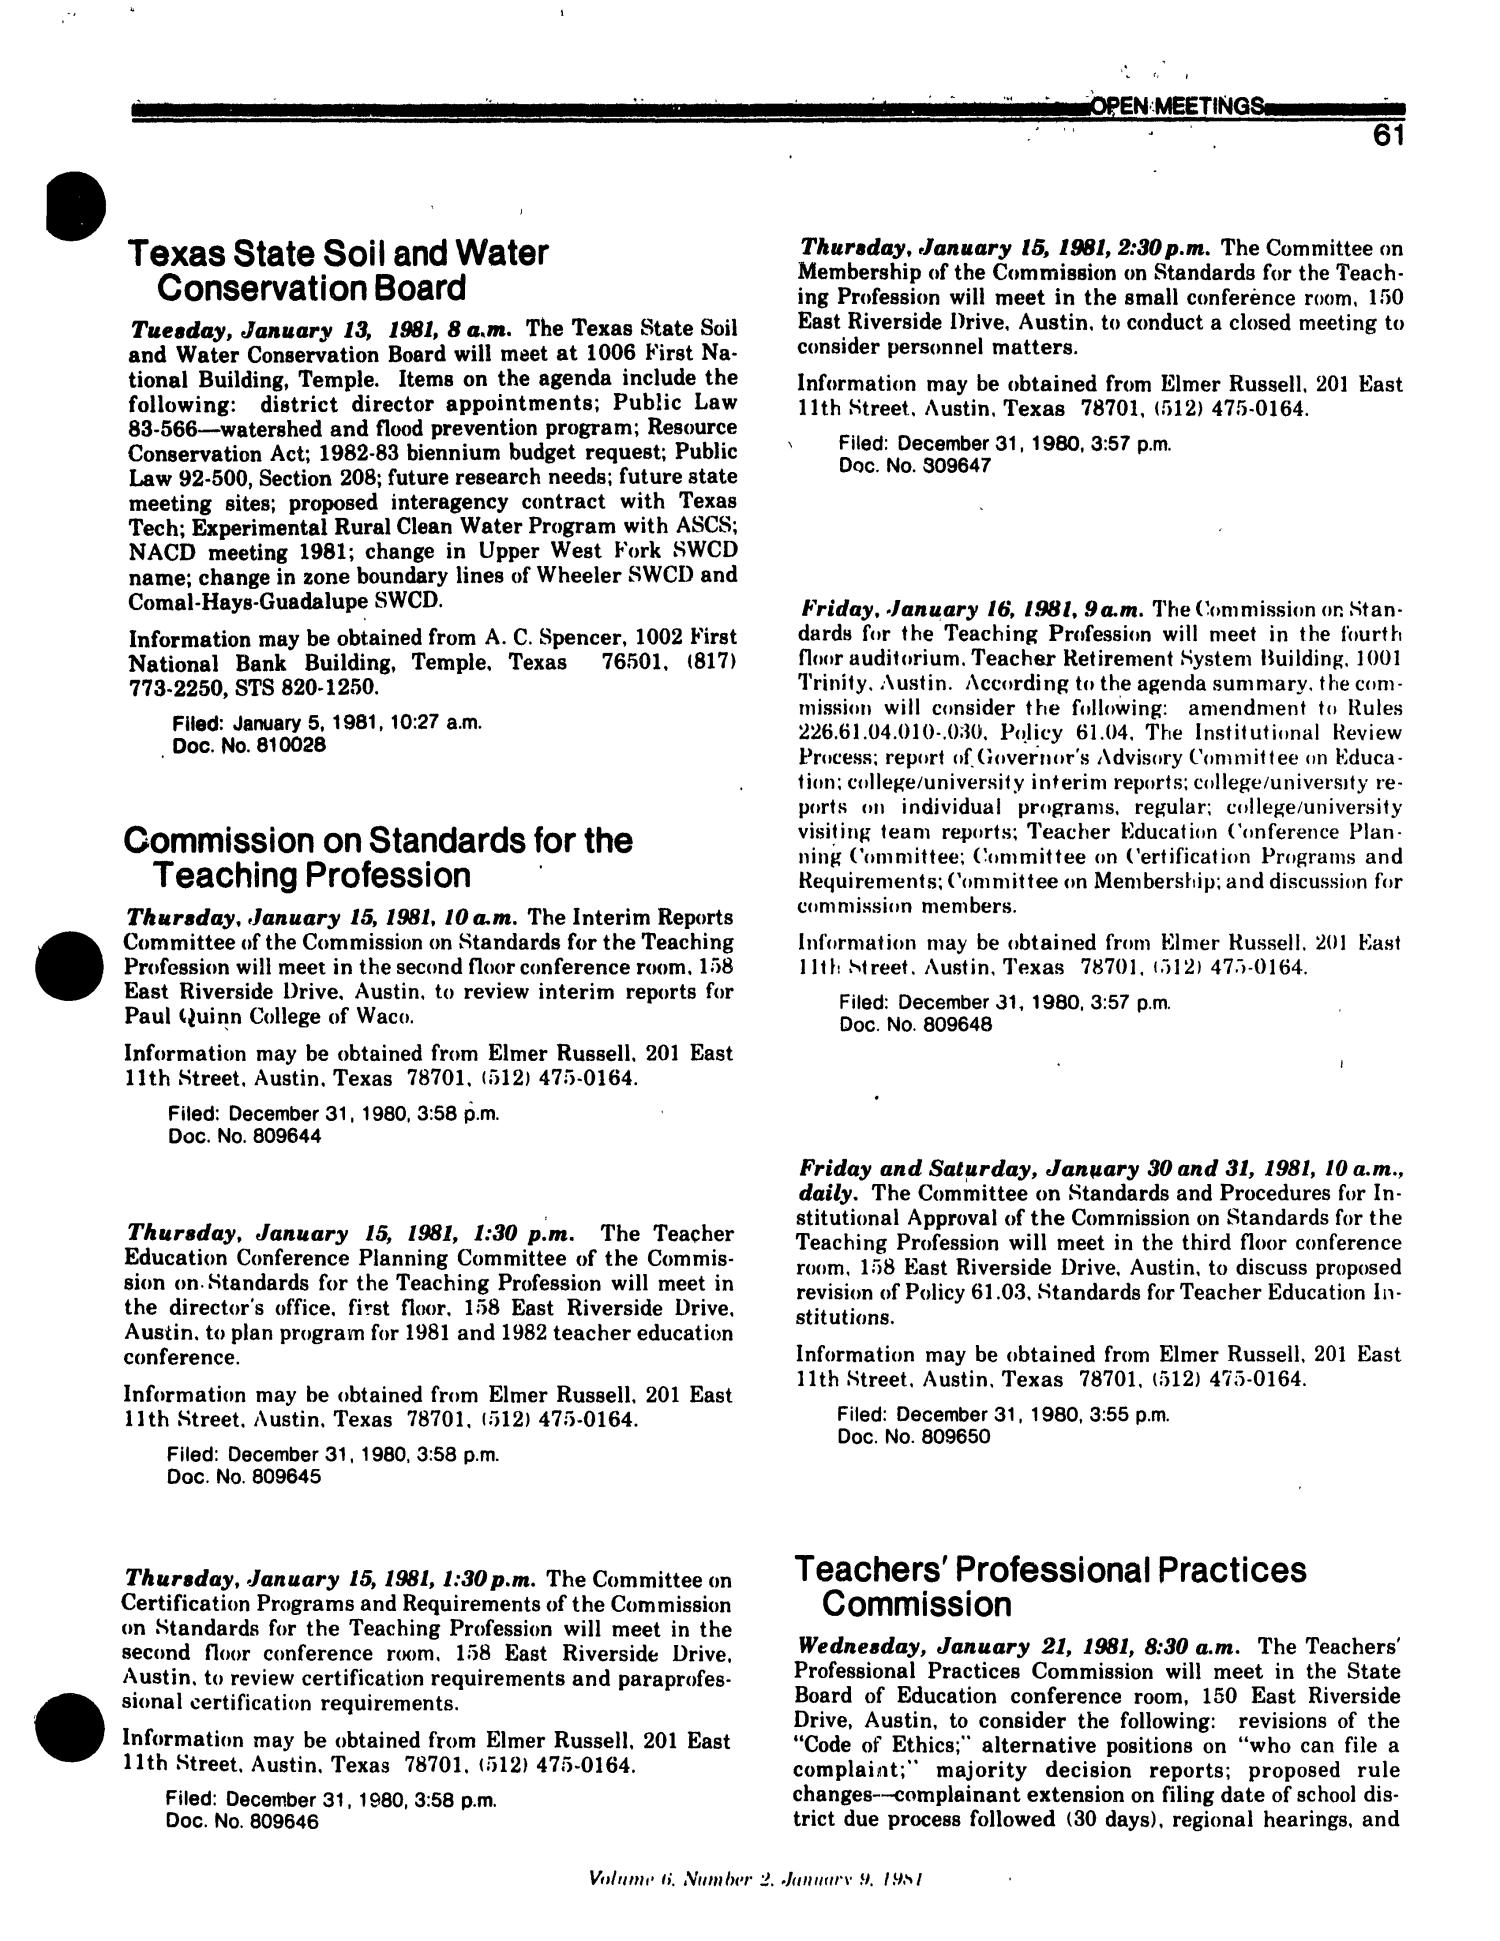 Texas Register, Volume 6, Number 2, Pages 21-80, January 9, 1981
                                                
                                                    61
                                                